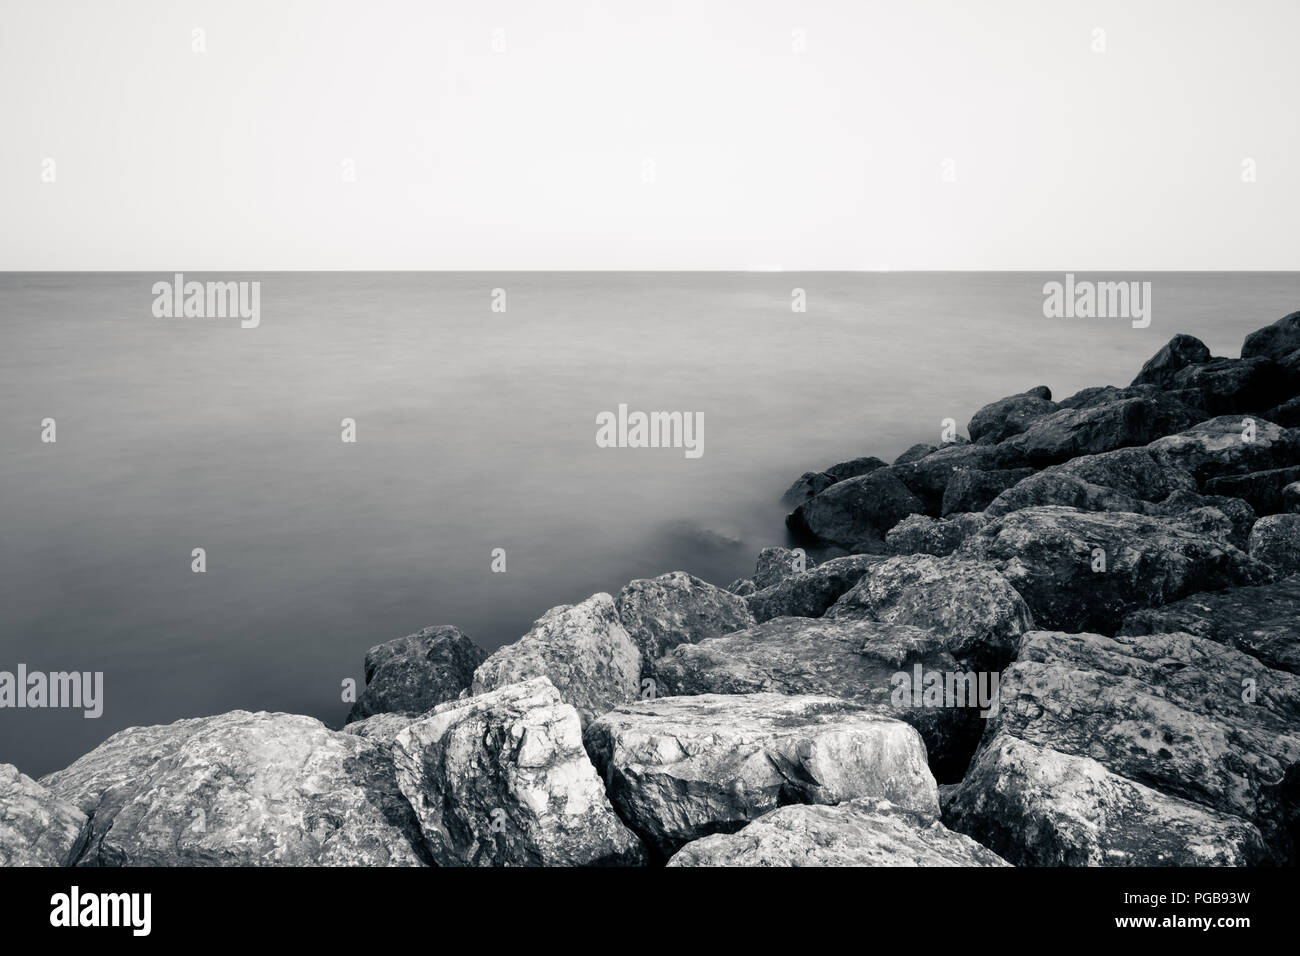 Long-exposure photograph of a smooth, peaceful lake beside a rocky coastline. Stock Photo